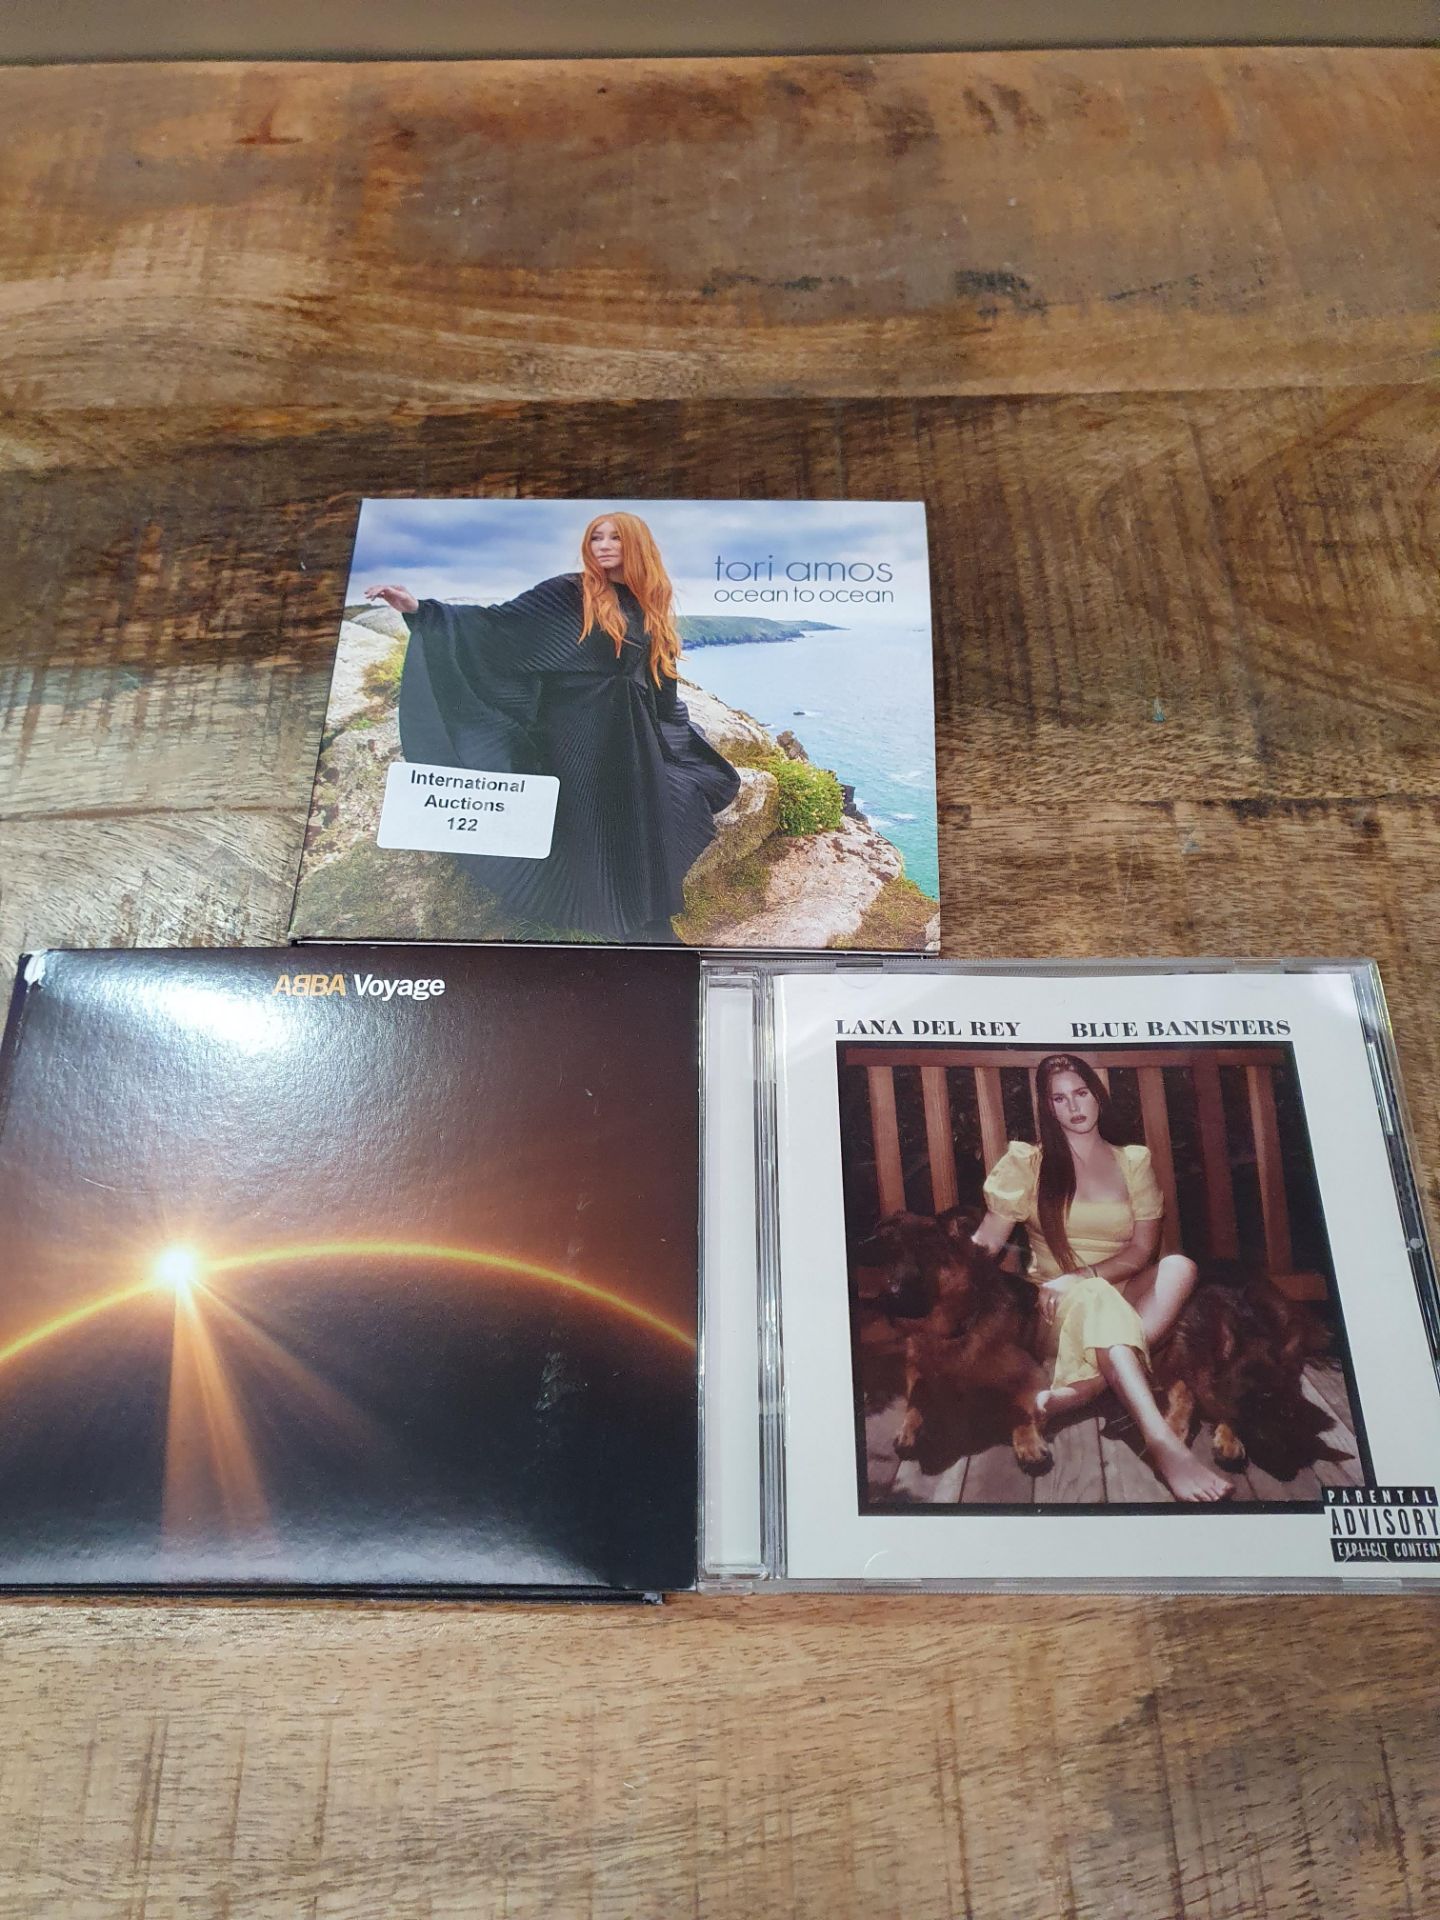 X 3 ITEMS TO INCLUDE LANA DEL RAY, ABBA VOYAGE, TORI AMOS